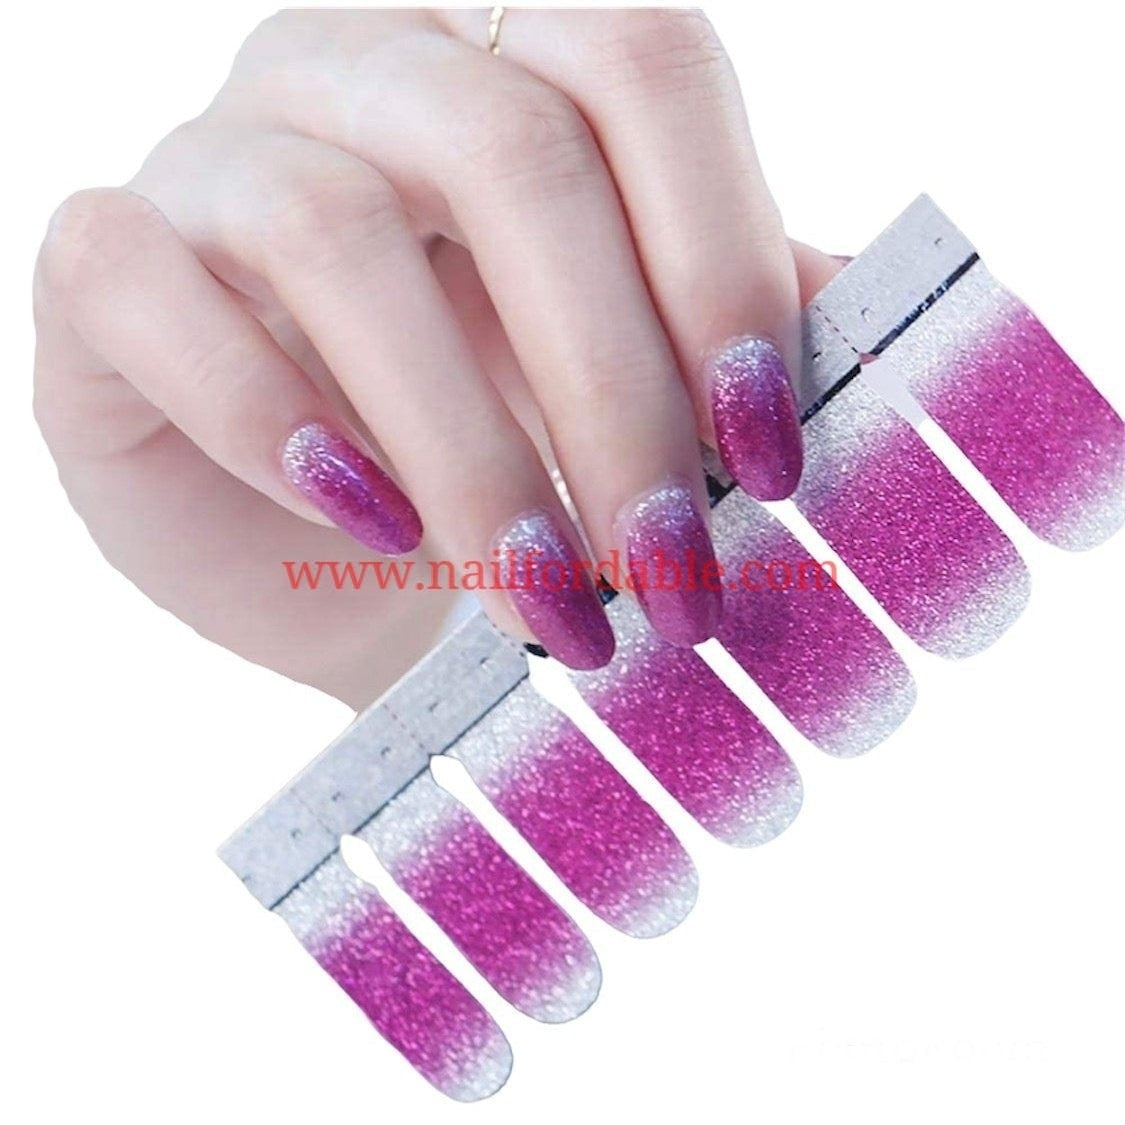 Pink to Silver gradient Nail Wraps | Semi Cured Gel Wraps | Gel Nail Wraps |Nail Polish | Nail Stickers